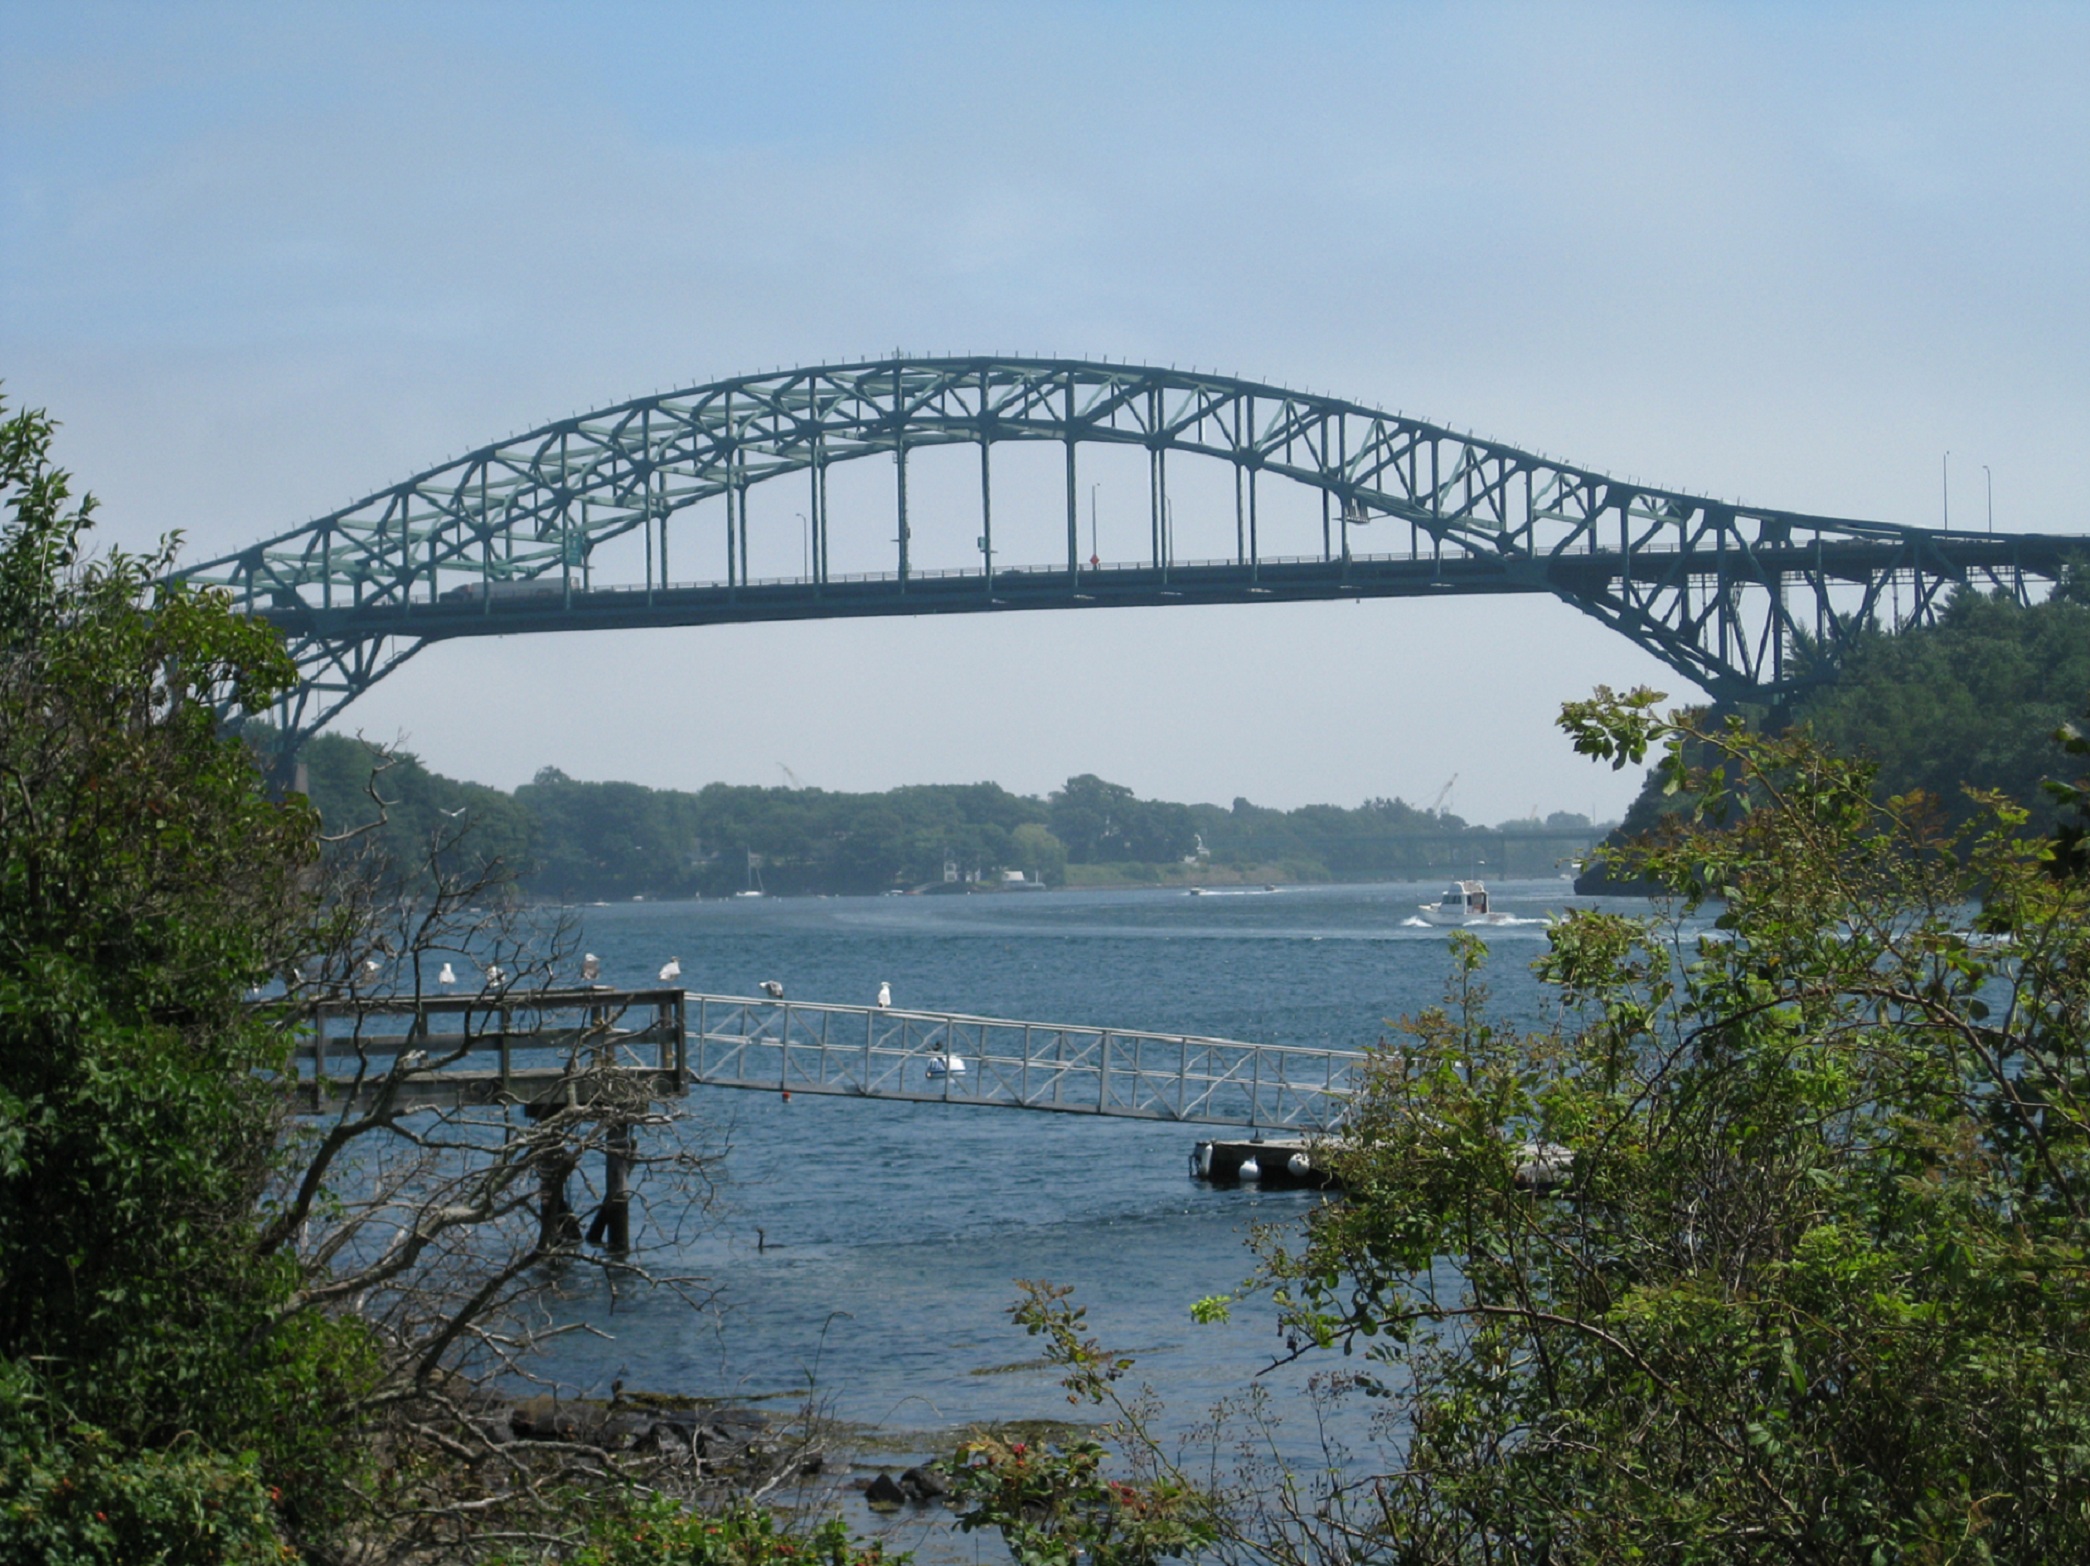 Maine-nh Route 95 Bridge (user submitted)